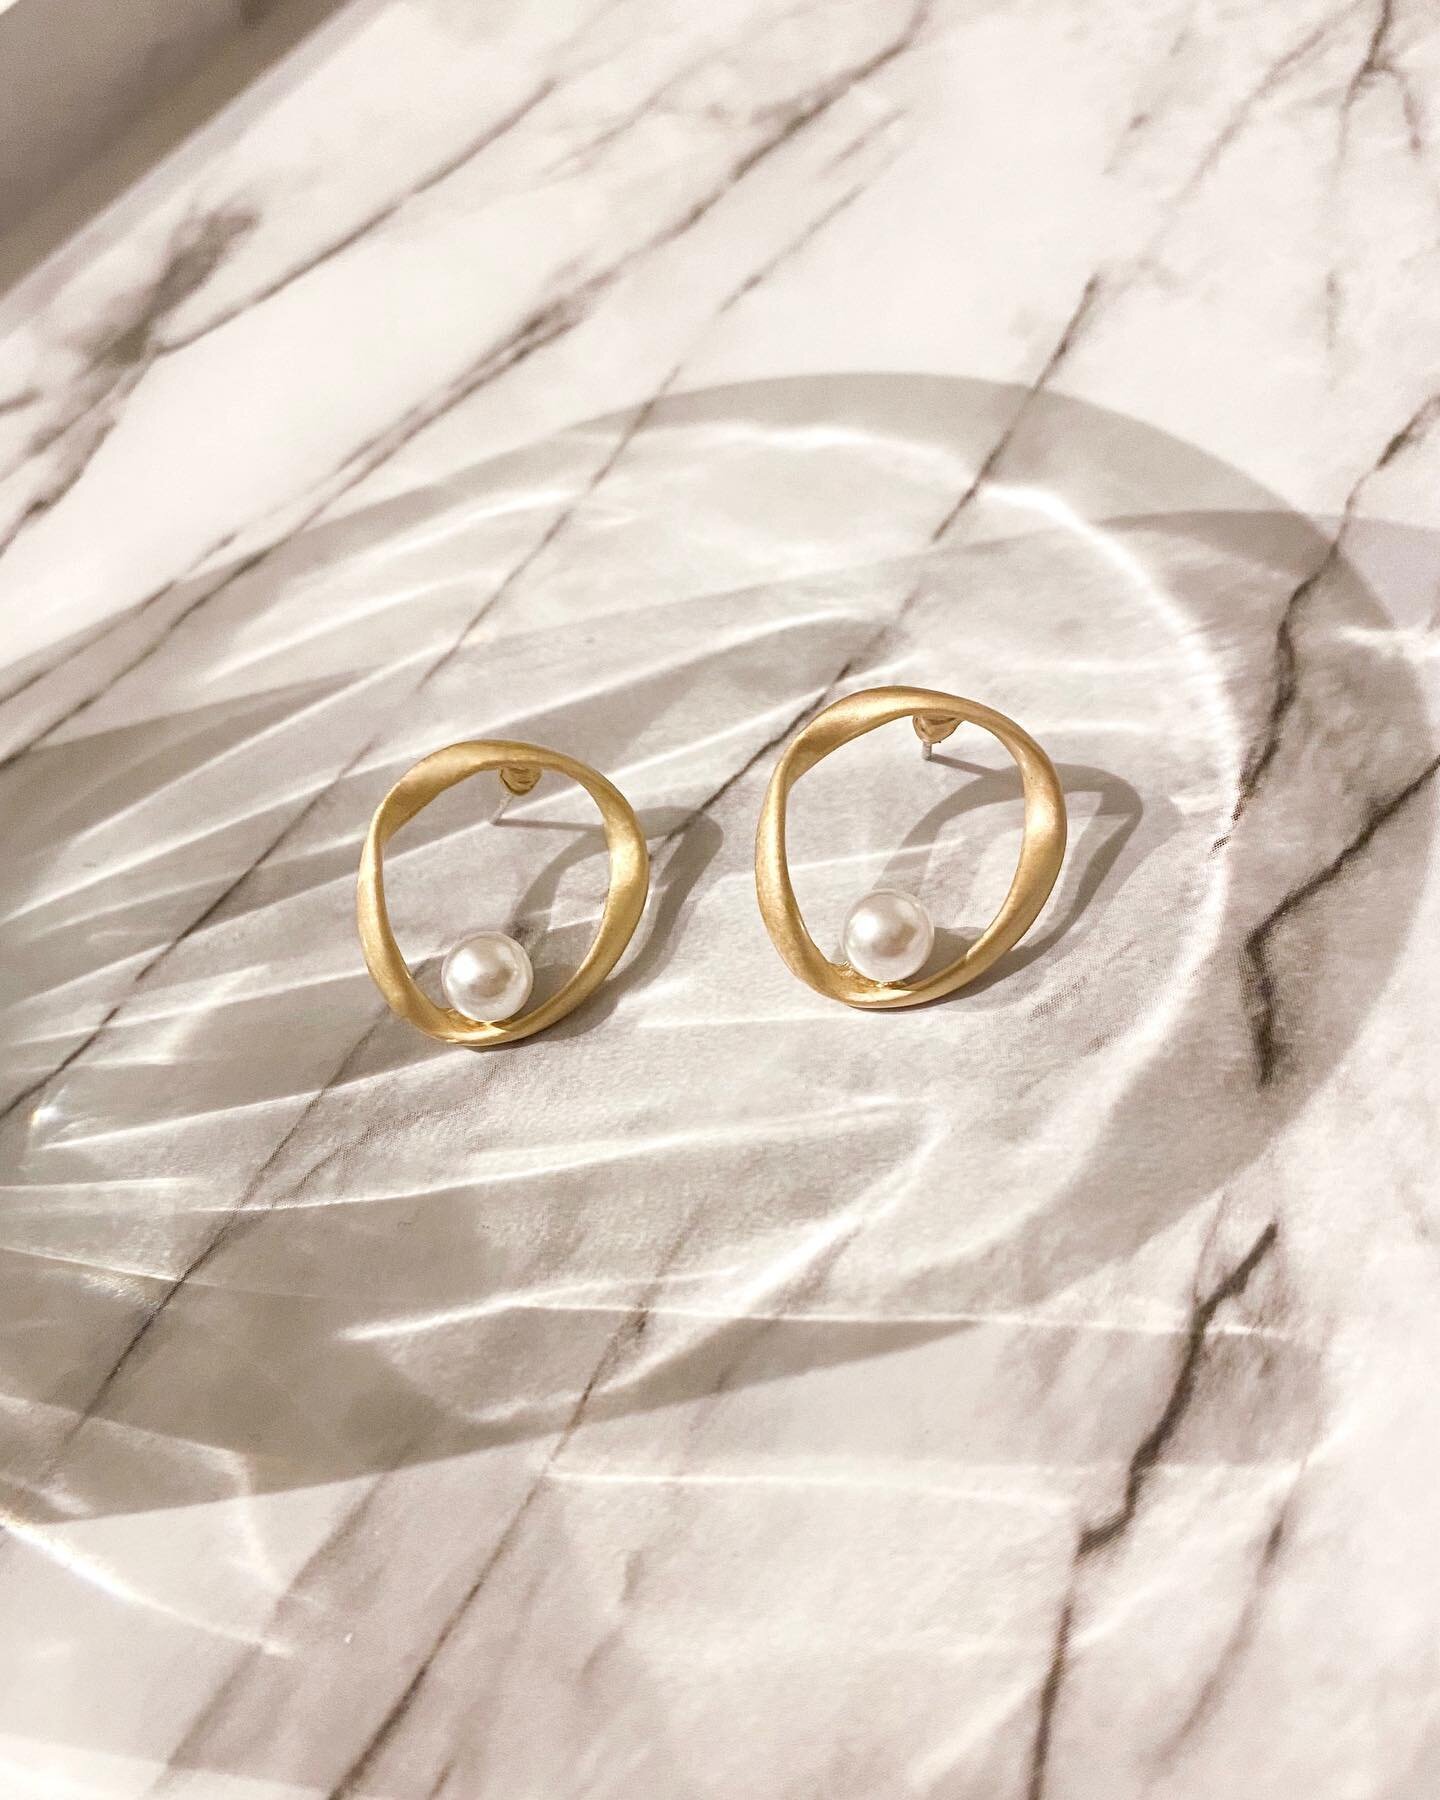 The Chloe Earrings are simply elegant #shinemore✨